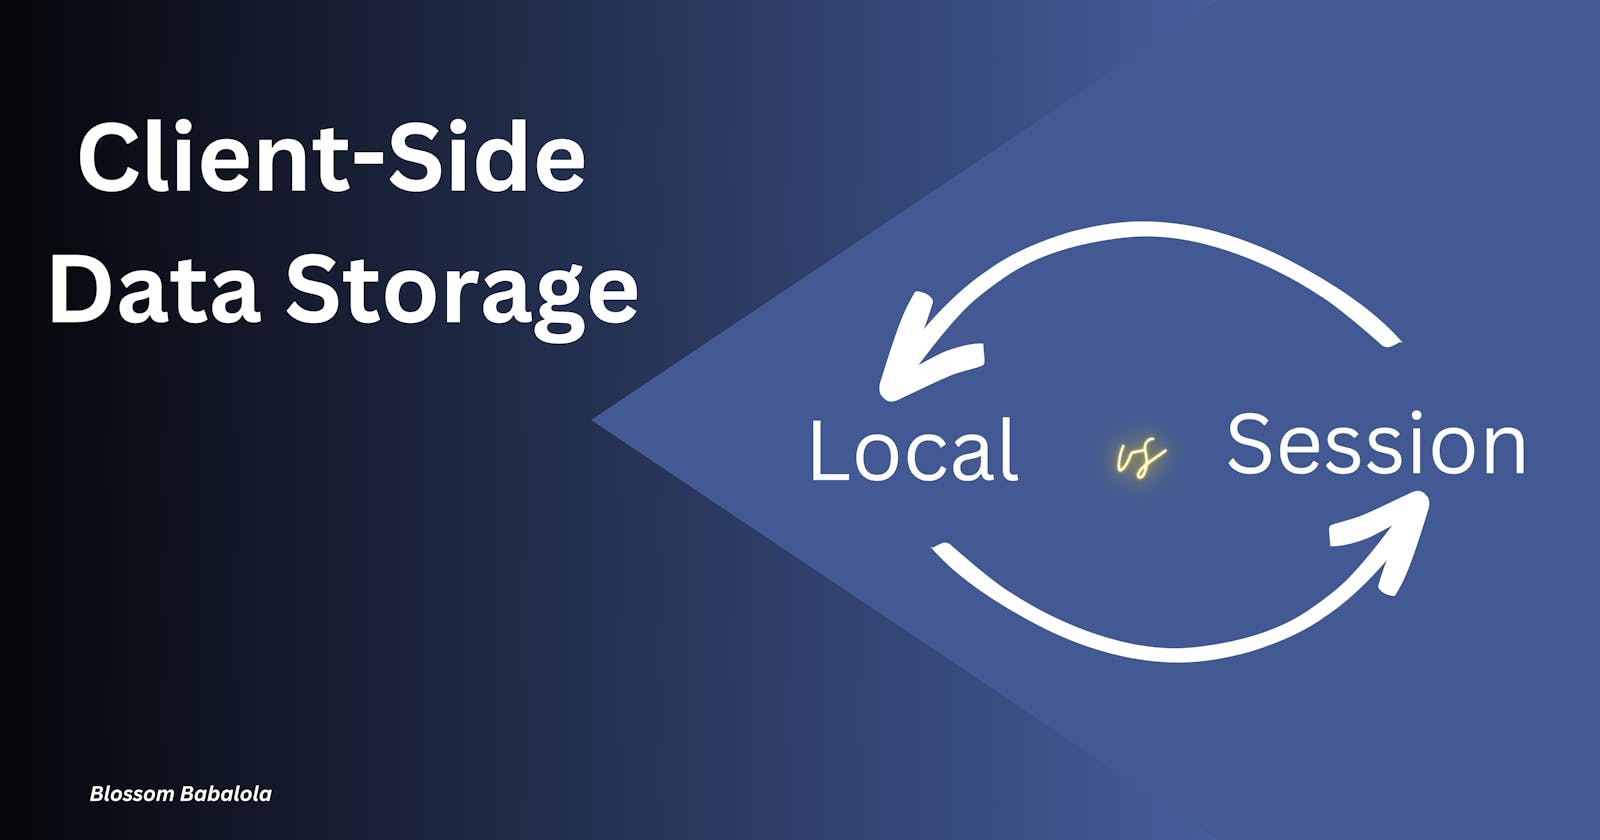 Data Storage on the client side: local storage and session storage